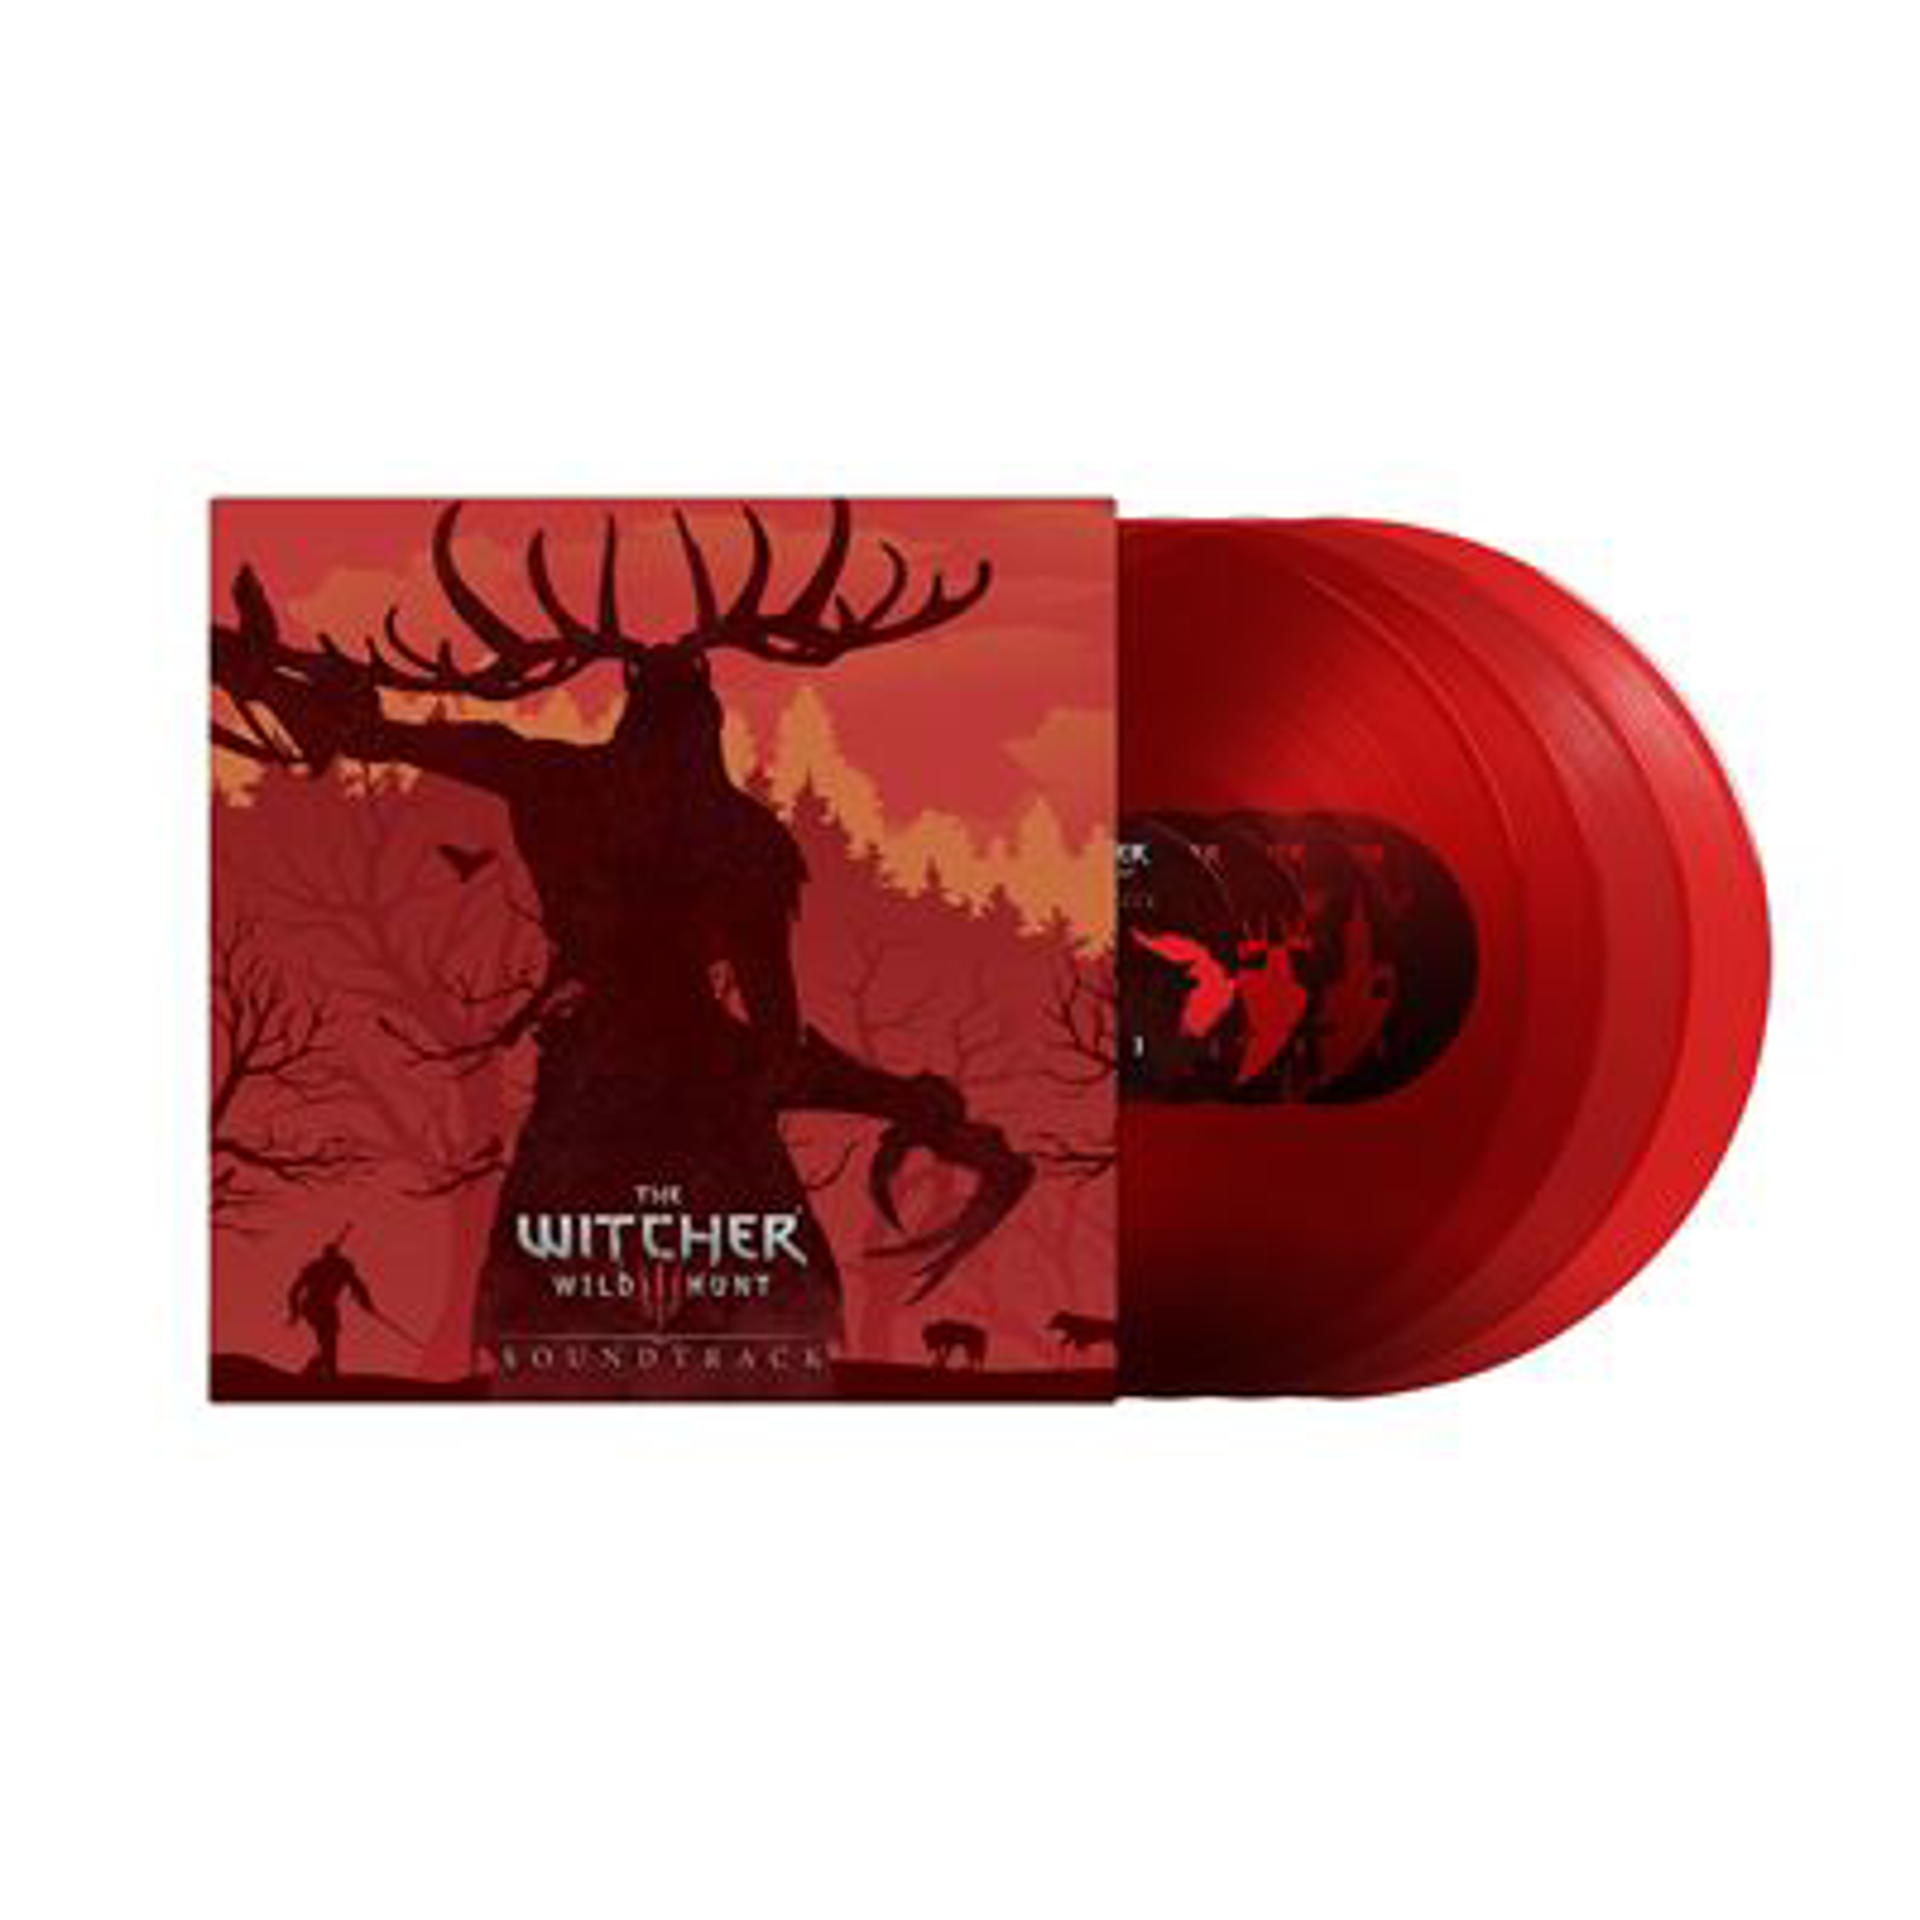 The Witcher 3: Complete Edition - Original Soundtrack - 4-LP Red Edition Exclue Fnac Vinyl